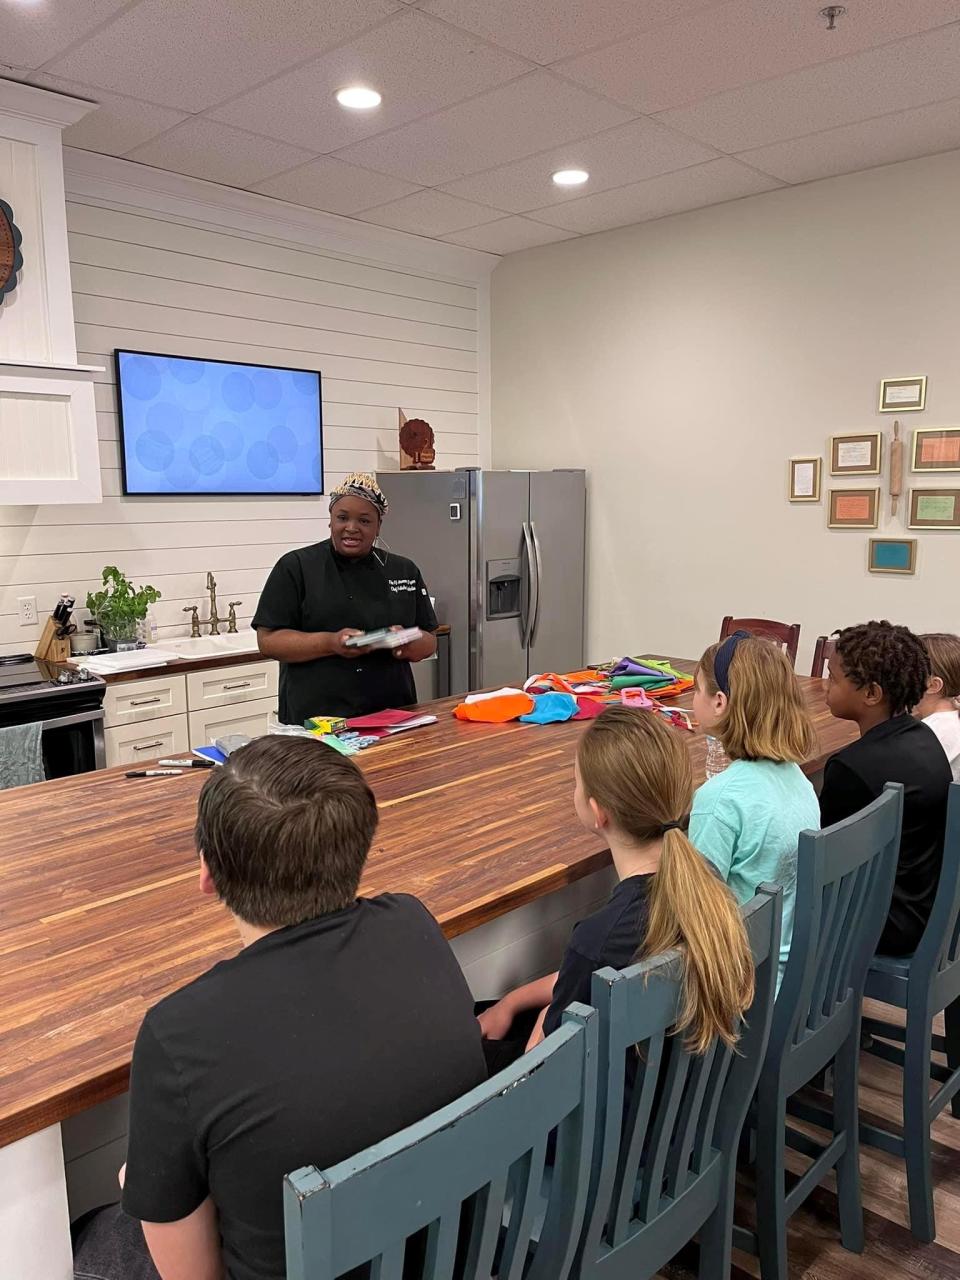 A cooking class at the Prepared Table led by Felisha Williams-Nicholson, owner of the FE-Nomenal Cooking Experience located in Tallahassee.